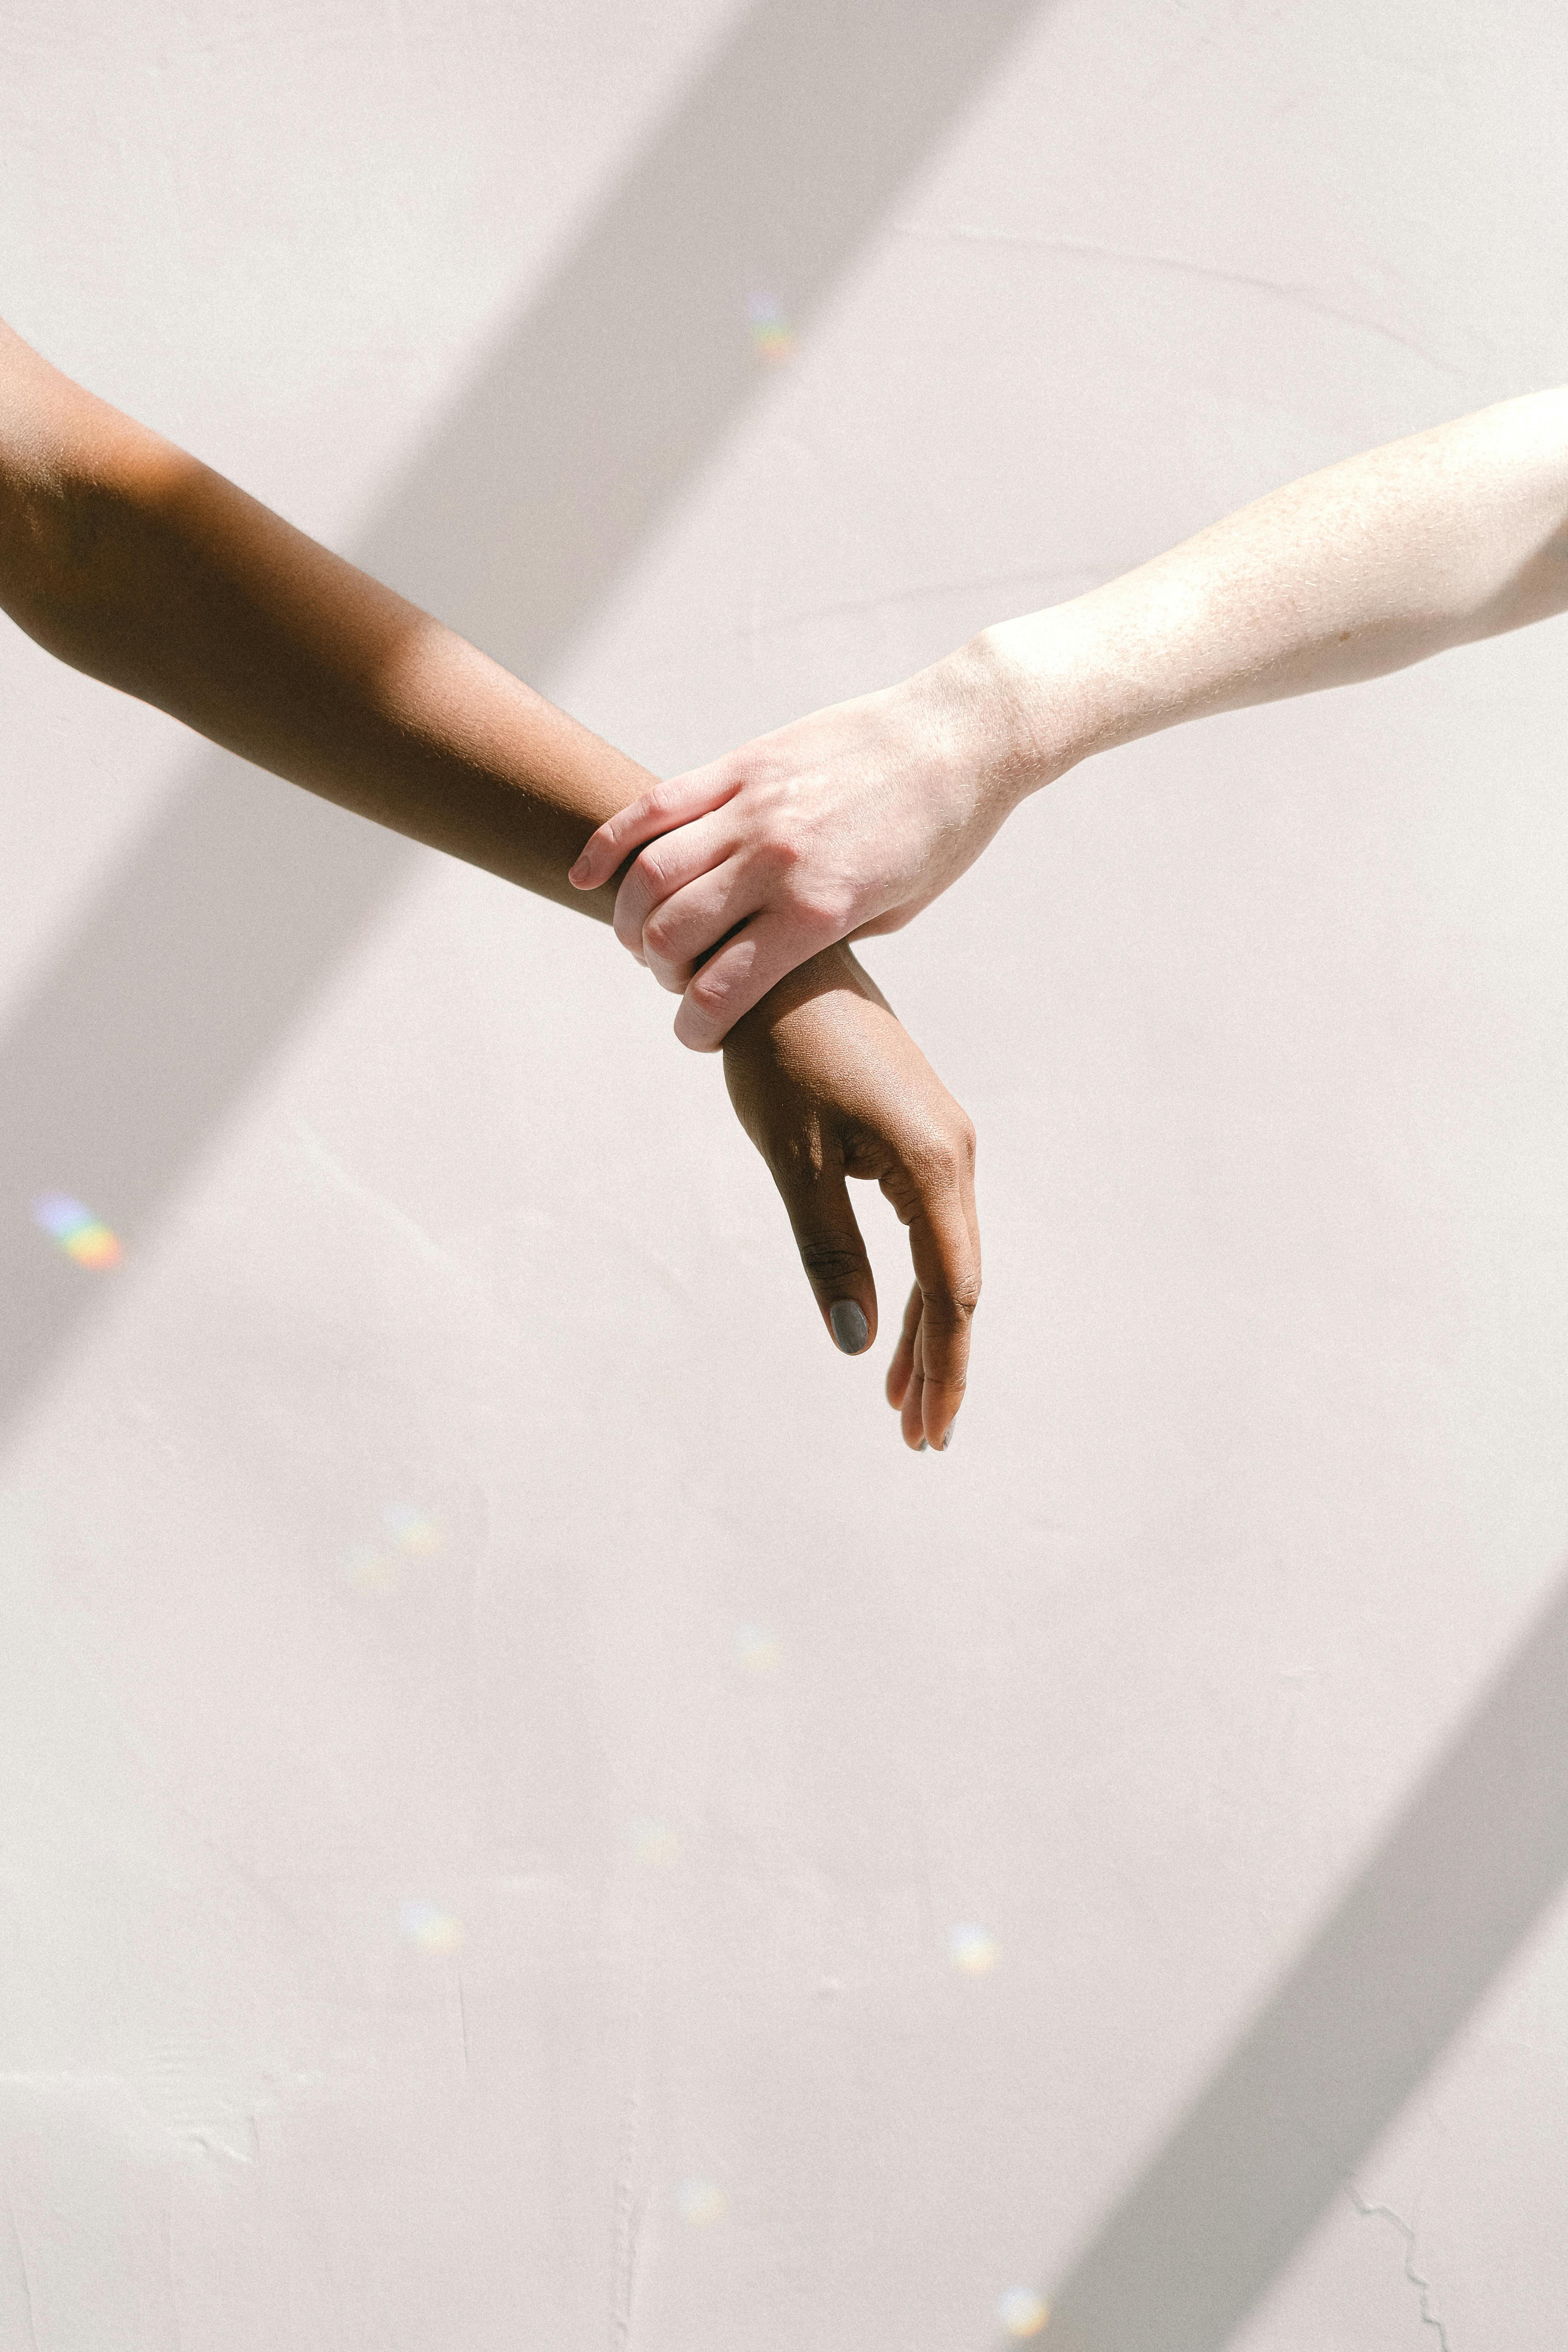 Hand Holding Someone by the Wrist · Free Stock Photo